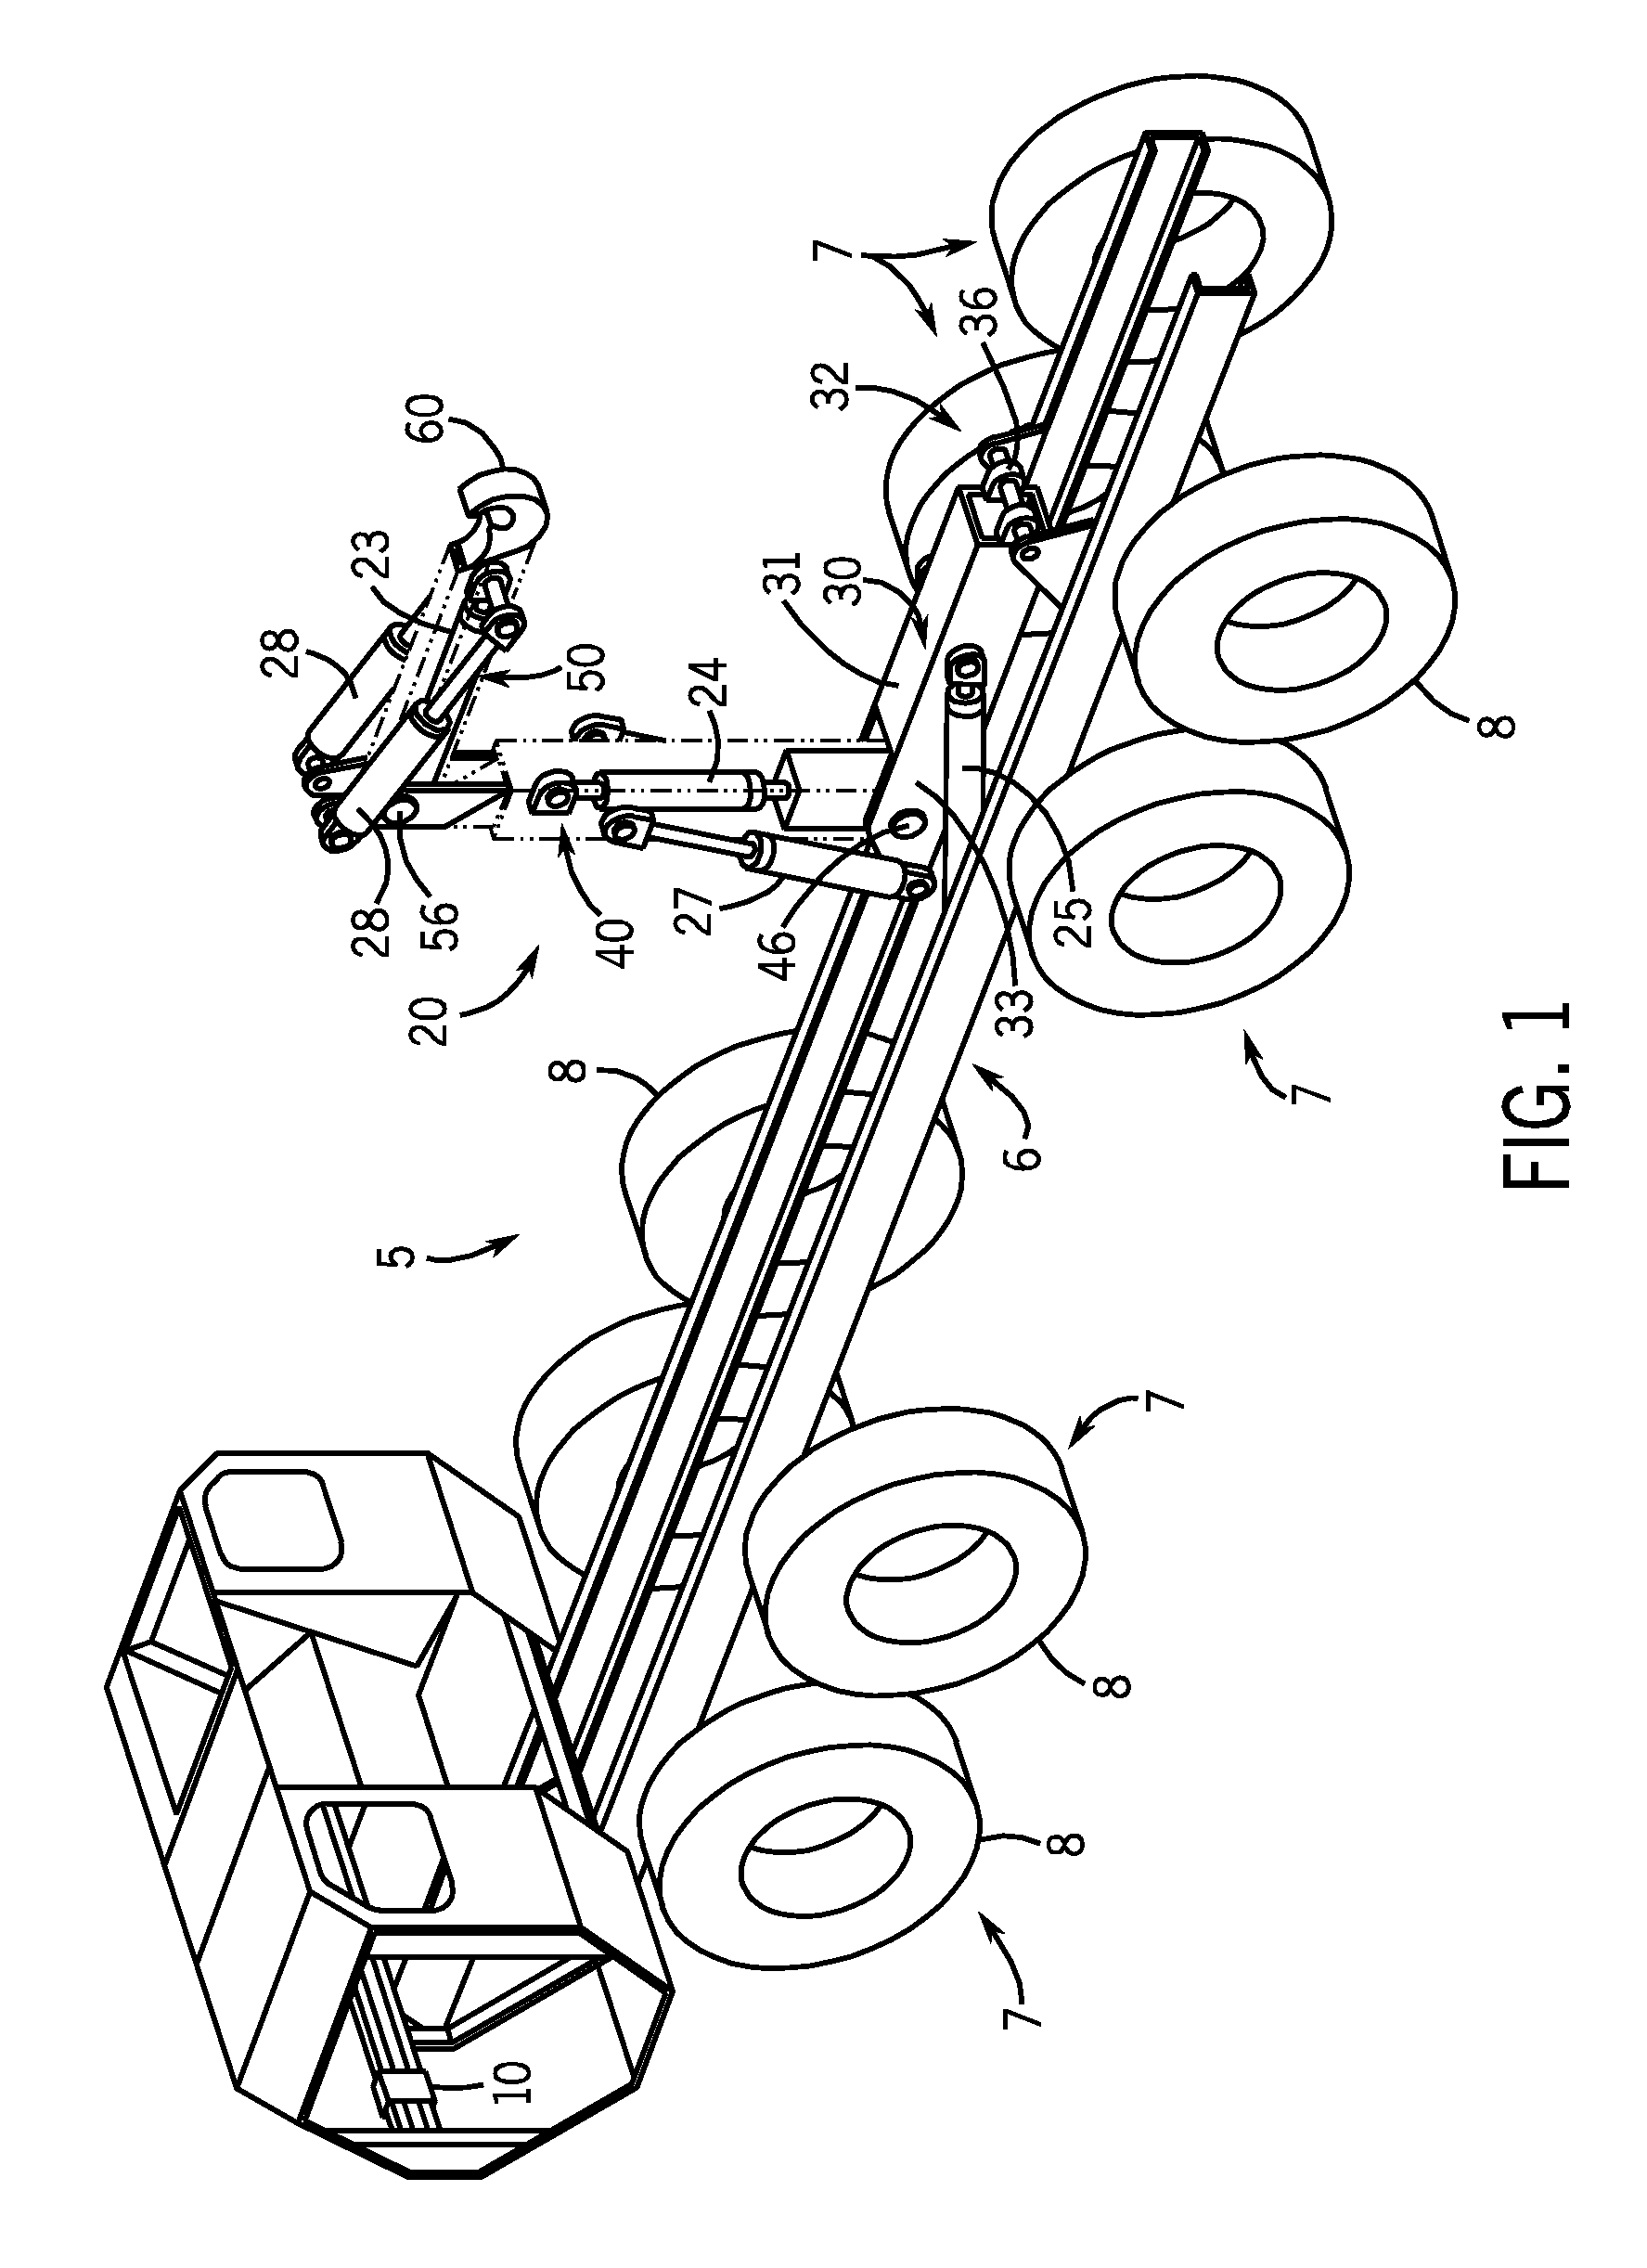 Rotatable and articulated material handling apparatus